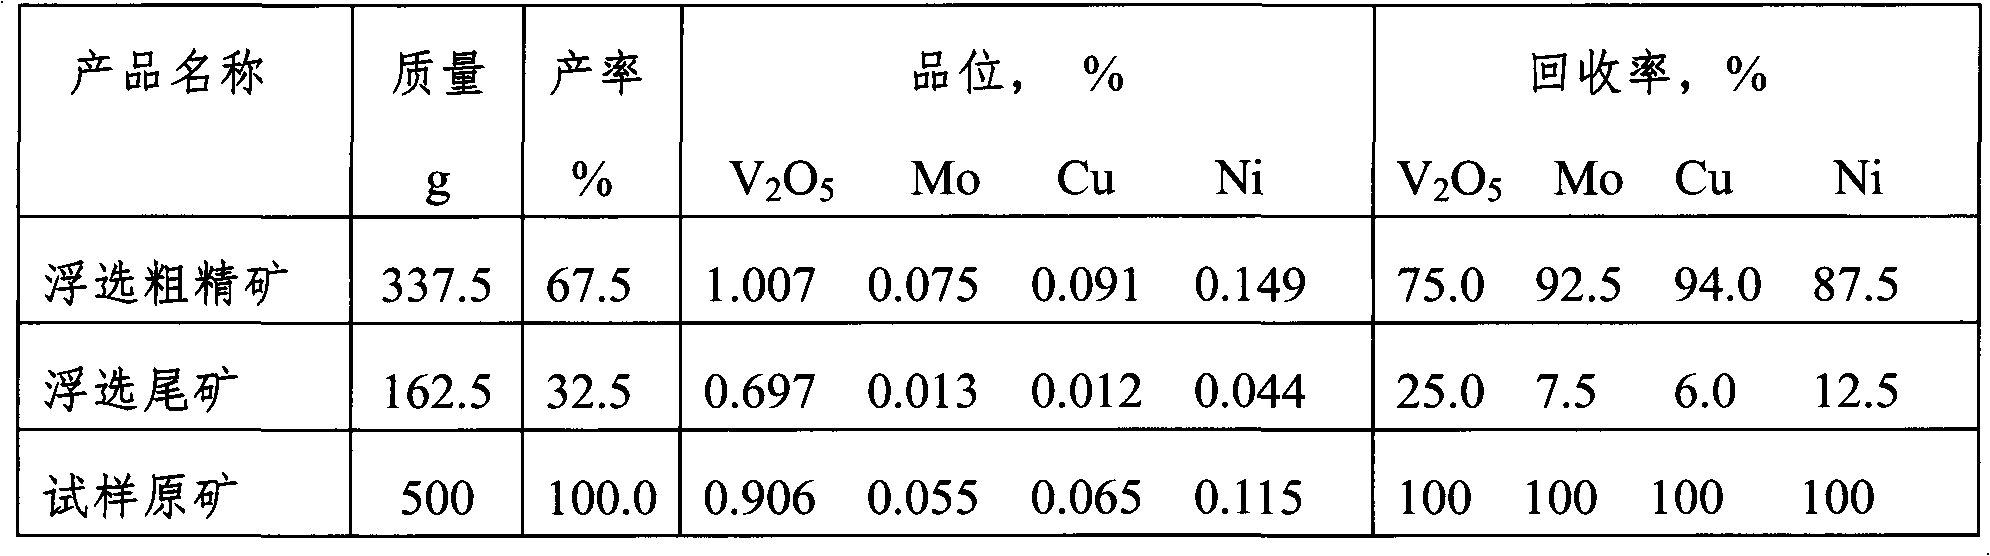 Leaching method for associated copper, molybdenum and nickel in coal mine containing scherbinaite